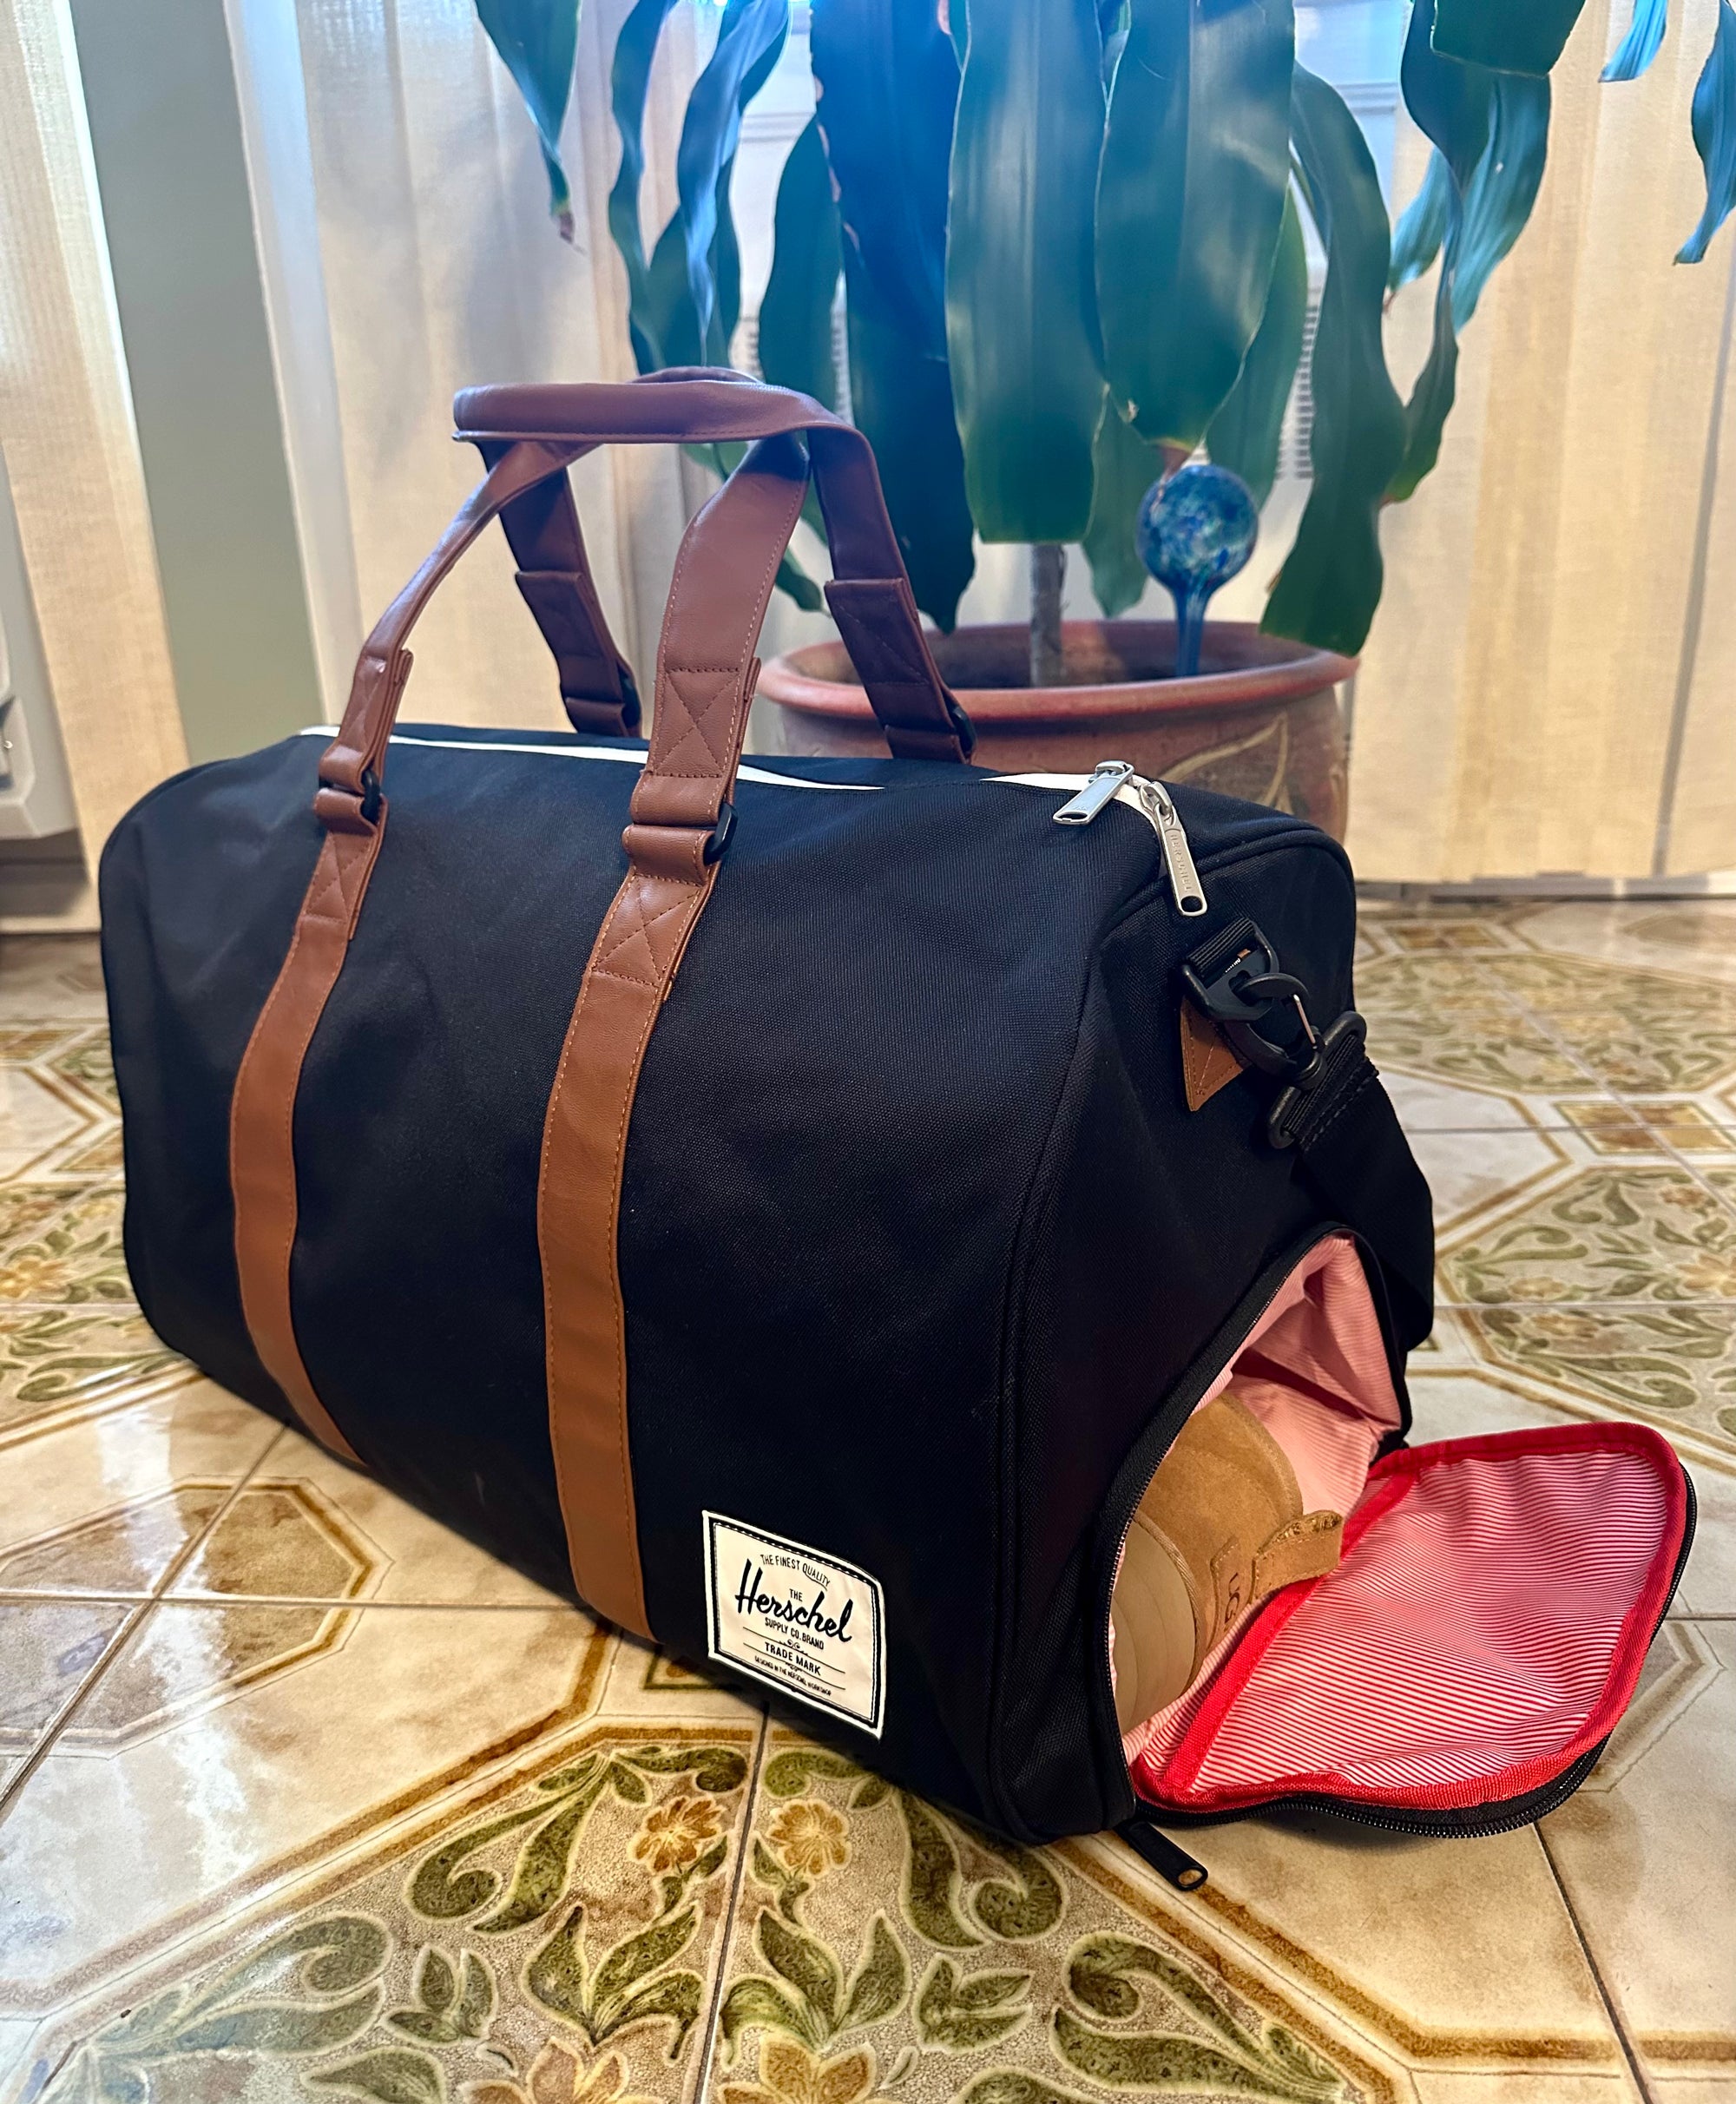 Herschel Luggage Review - Backpack, Hardshell Suitcases